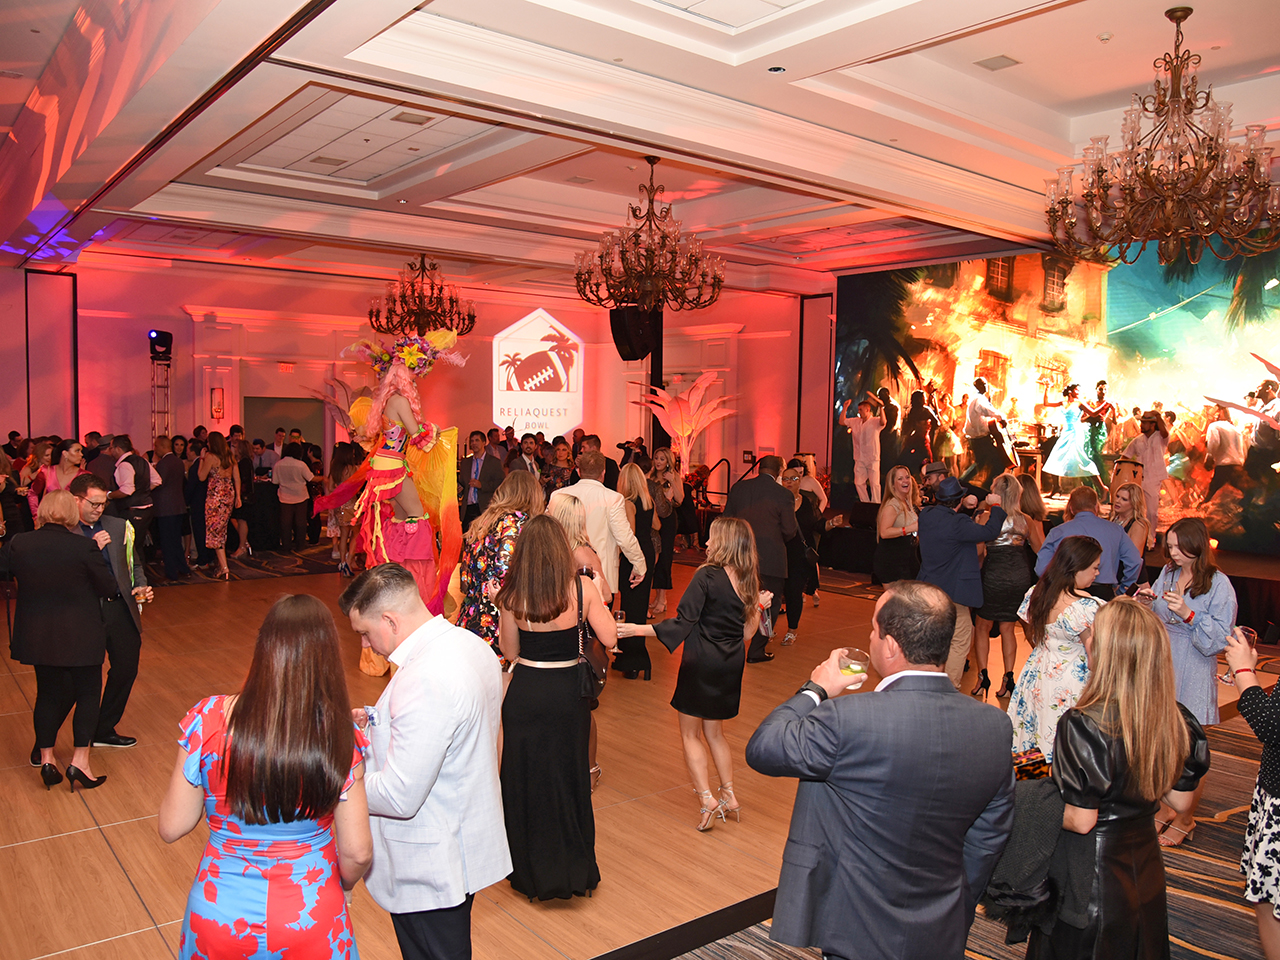 More than 1,500 bowl supporters enjoyed the Gridiron Gala 